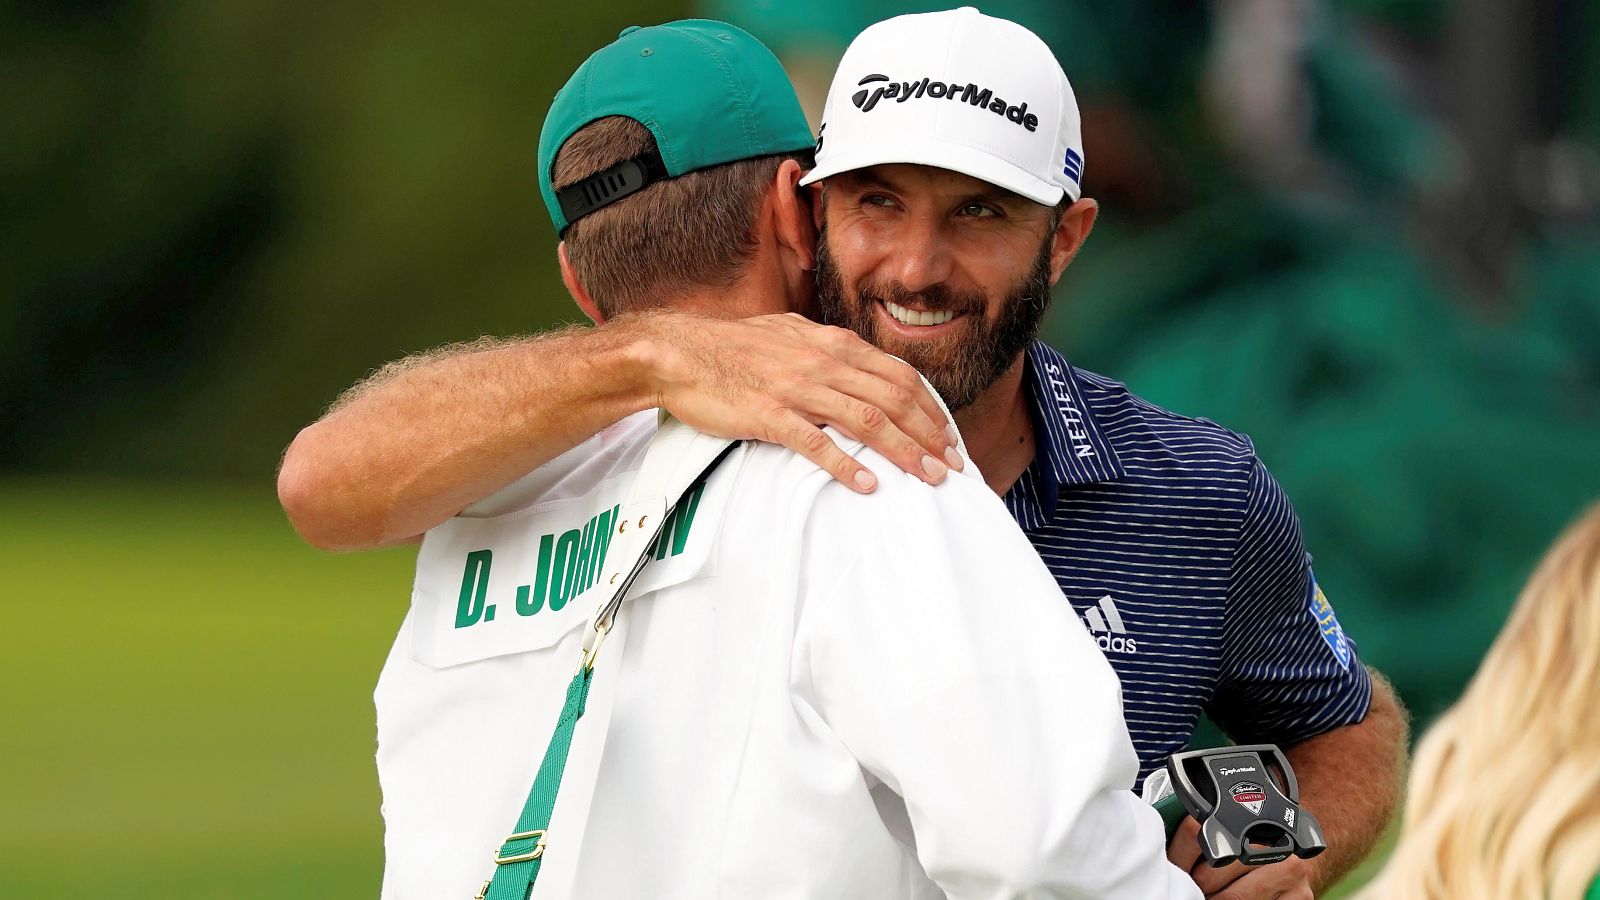 Masters-Champion 2020: Dustin Johnson/USA © Augusta National/Getty Images